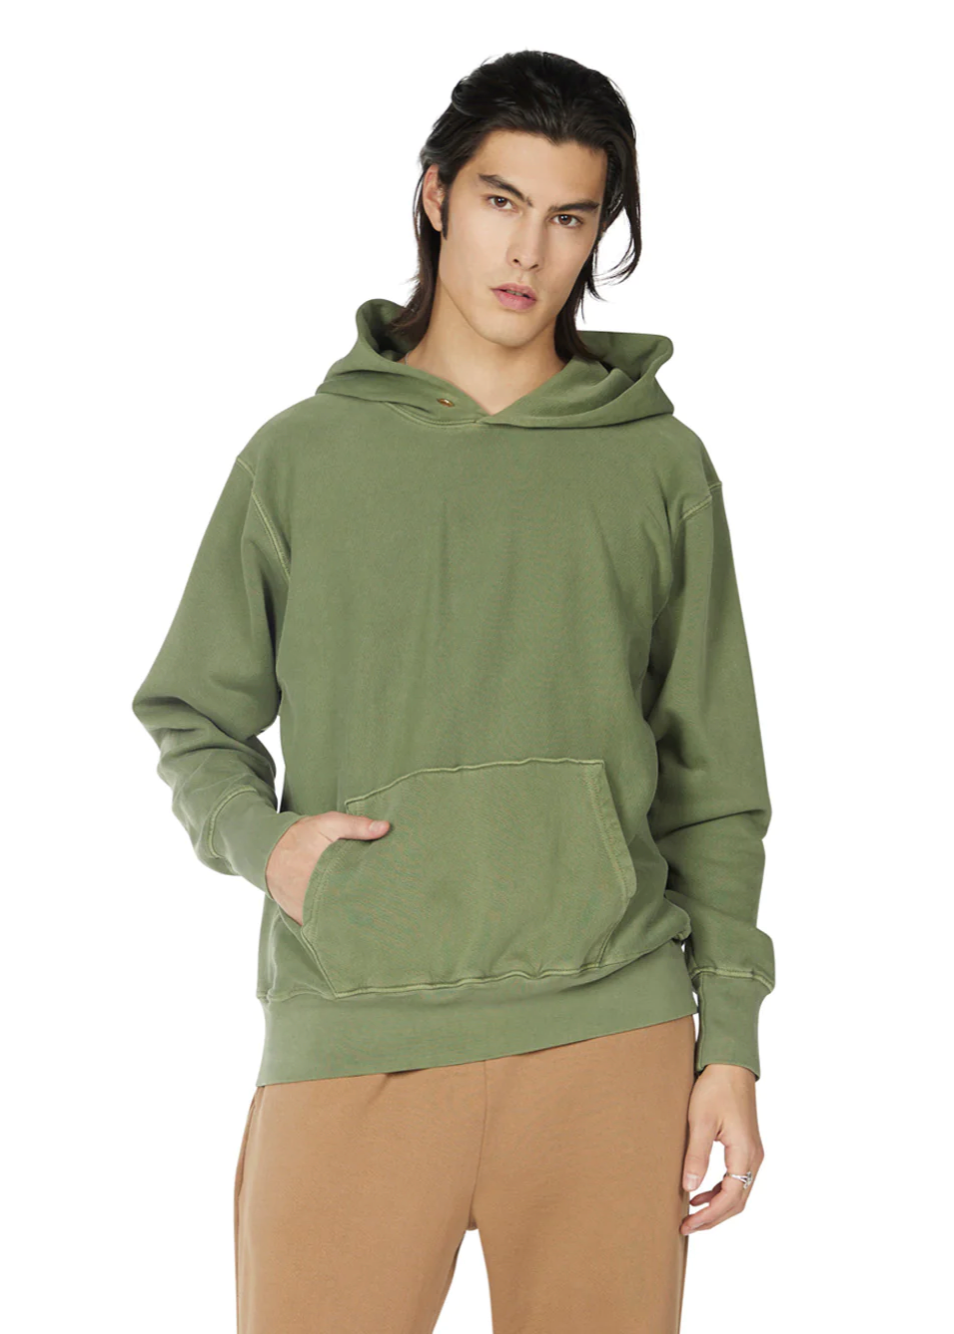 Les Tien Men's Pullover Hoodie (Washed Spruce) - Products